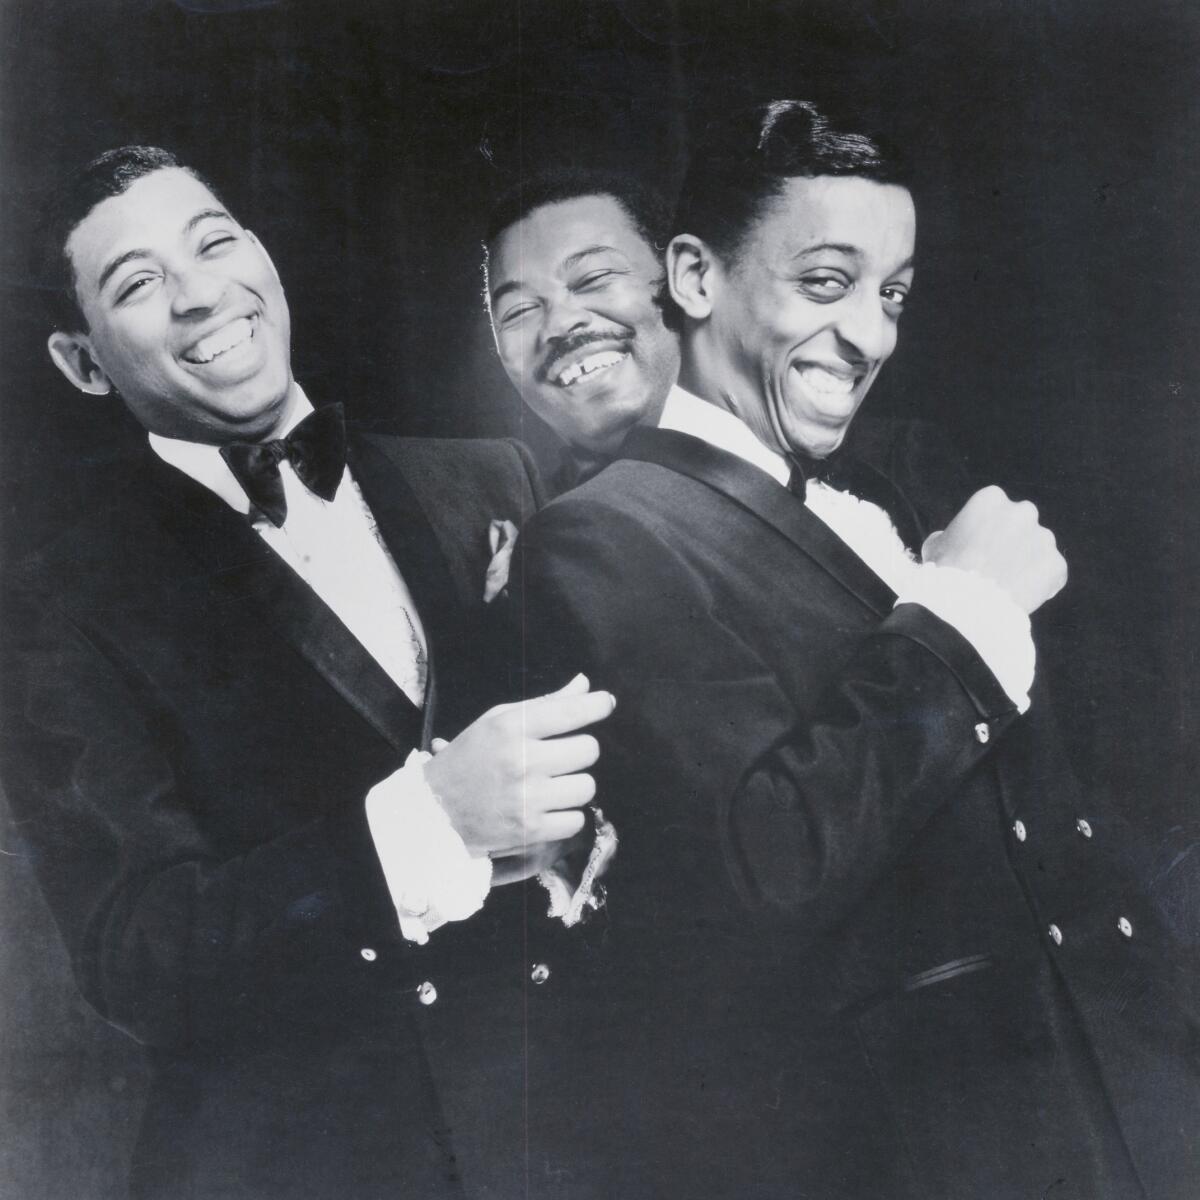 Three Black men in formalwear pose together in a black-and-white promotional image from 1963